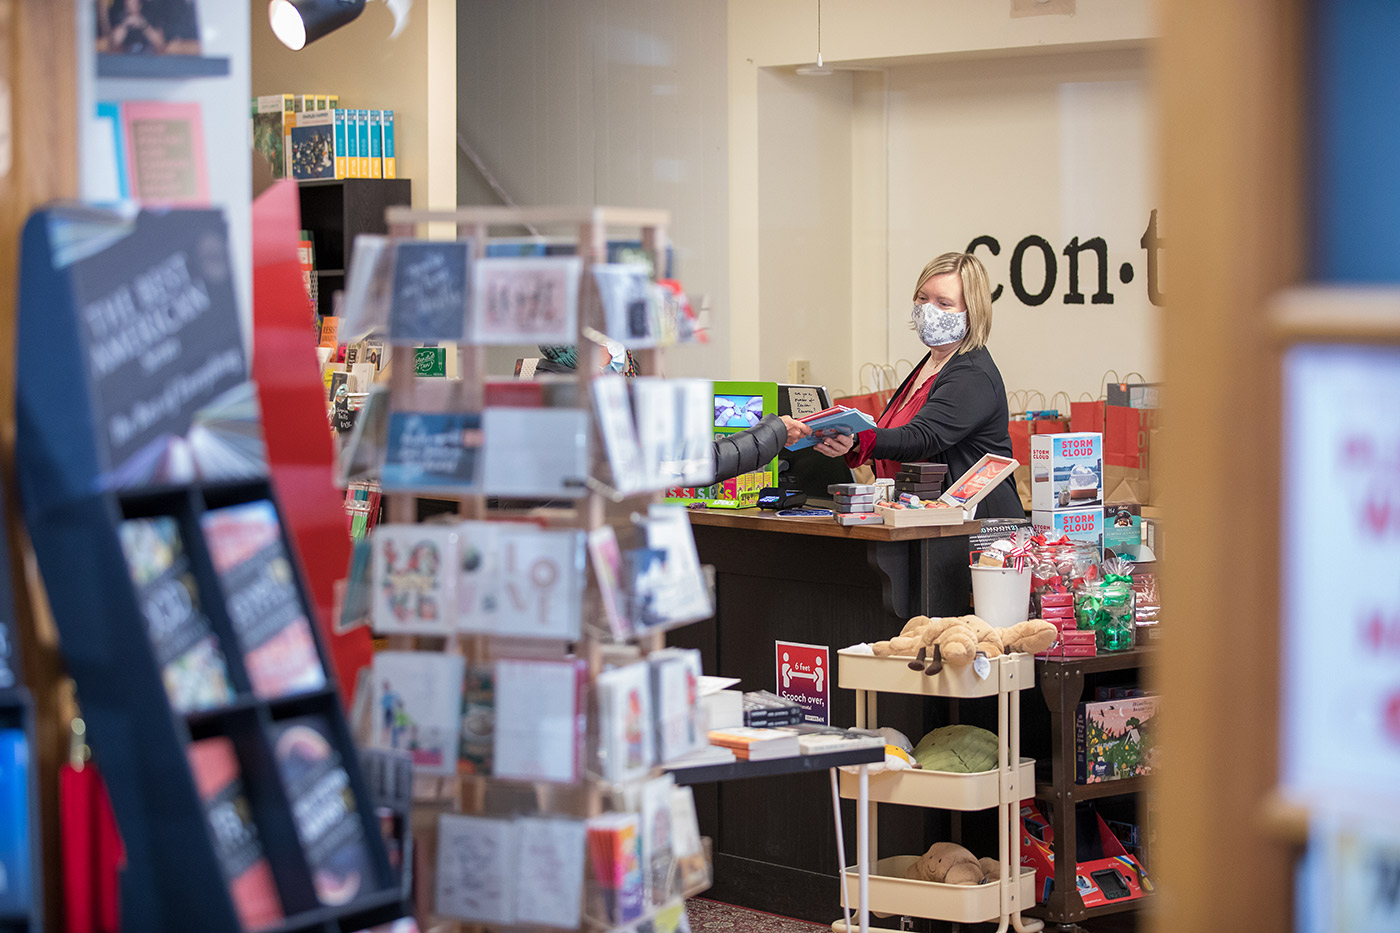 Store manager wearing a mask helping a customer purchase books